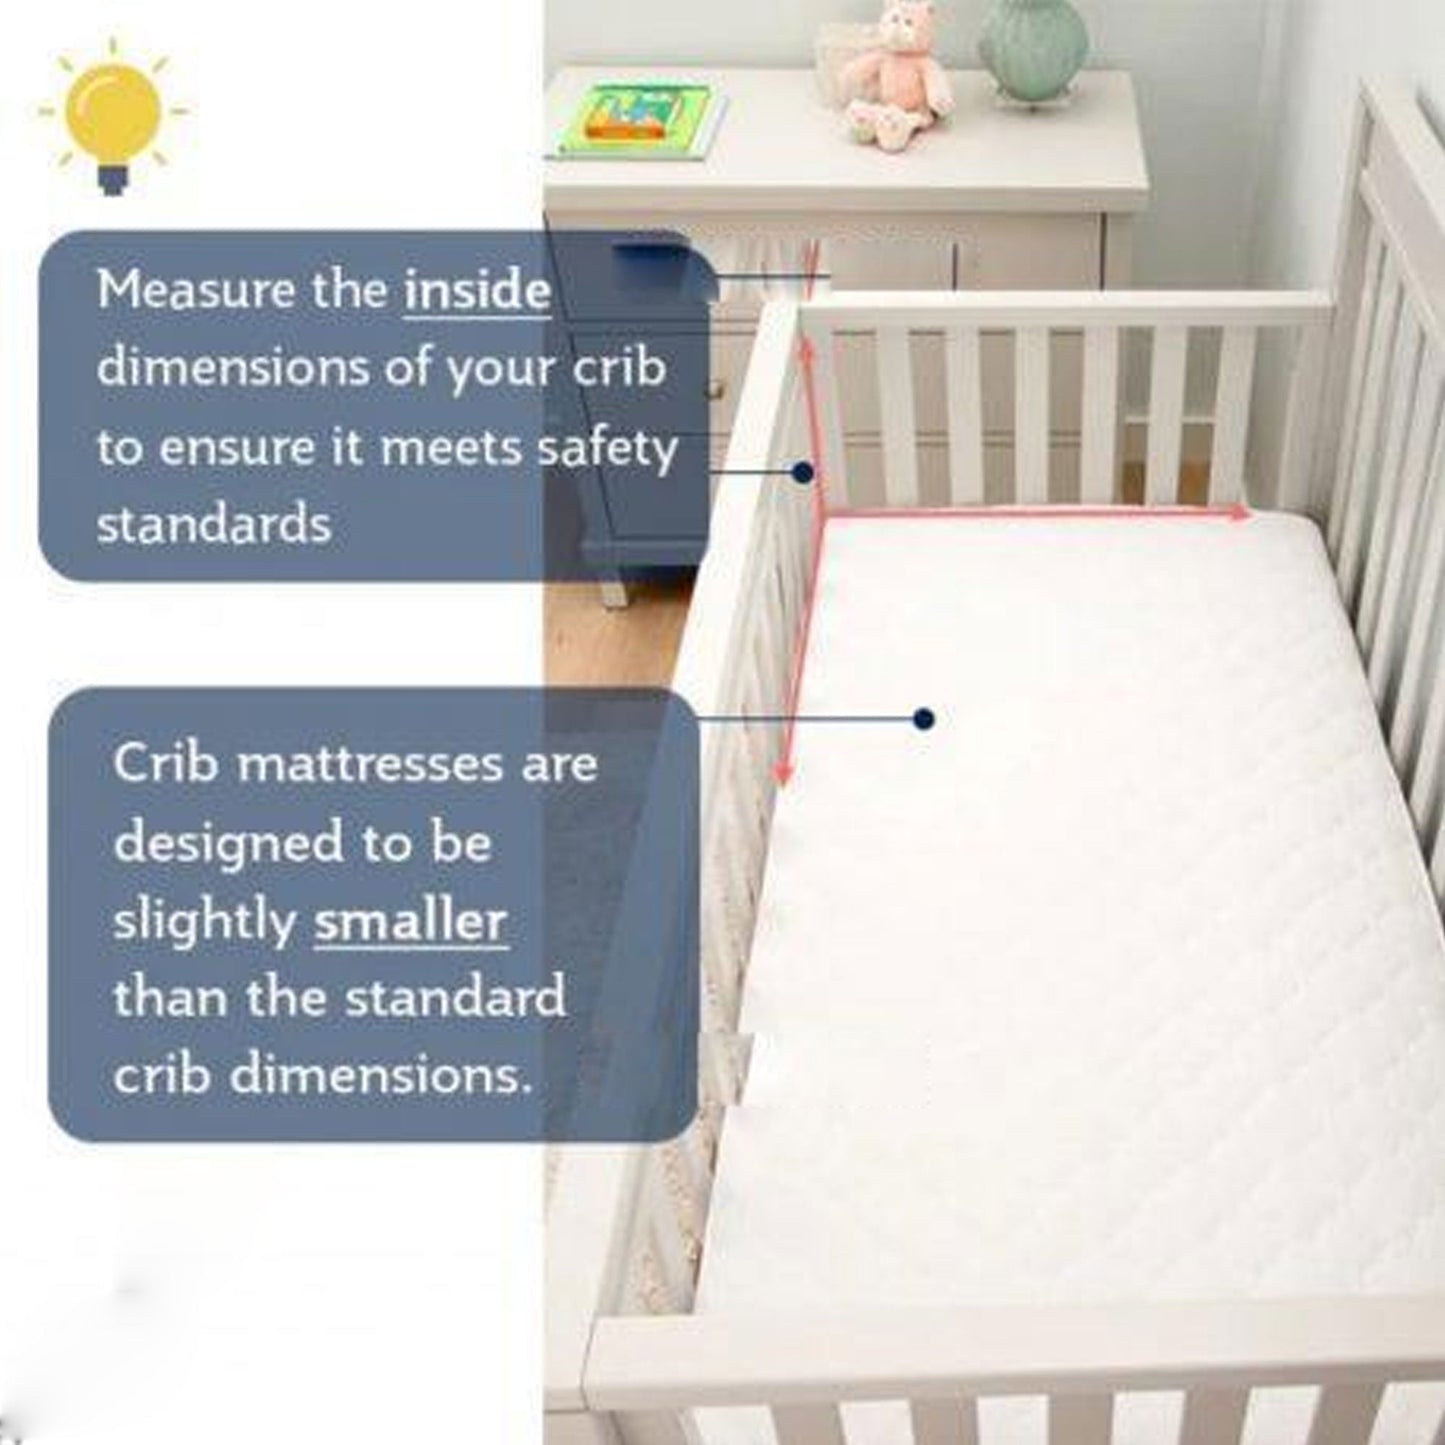 89 X 42 X 4 CM - CRIB Breathable Quilted Cot Baby Mattress - TheComfortshop.co.ukNursery Bedding0721718957294thecomfortshopTheComfortshop.co.ukCrib 89 x 4289 X 42 X 4 CM - CRIB Breathable Quilted Cot Baby Mattress - TheComfortshop.co.uk